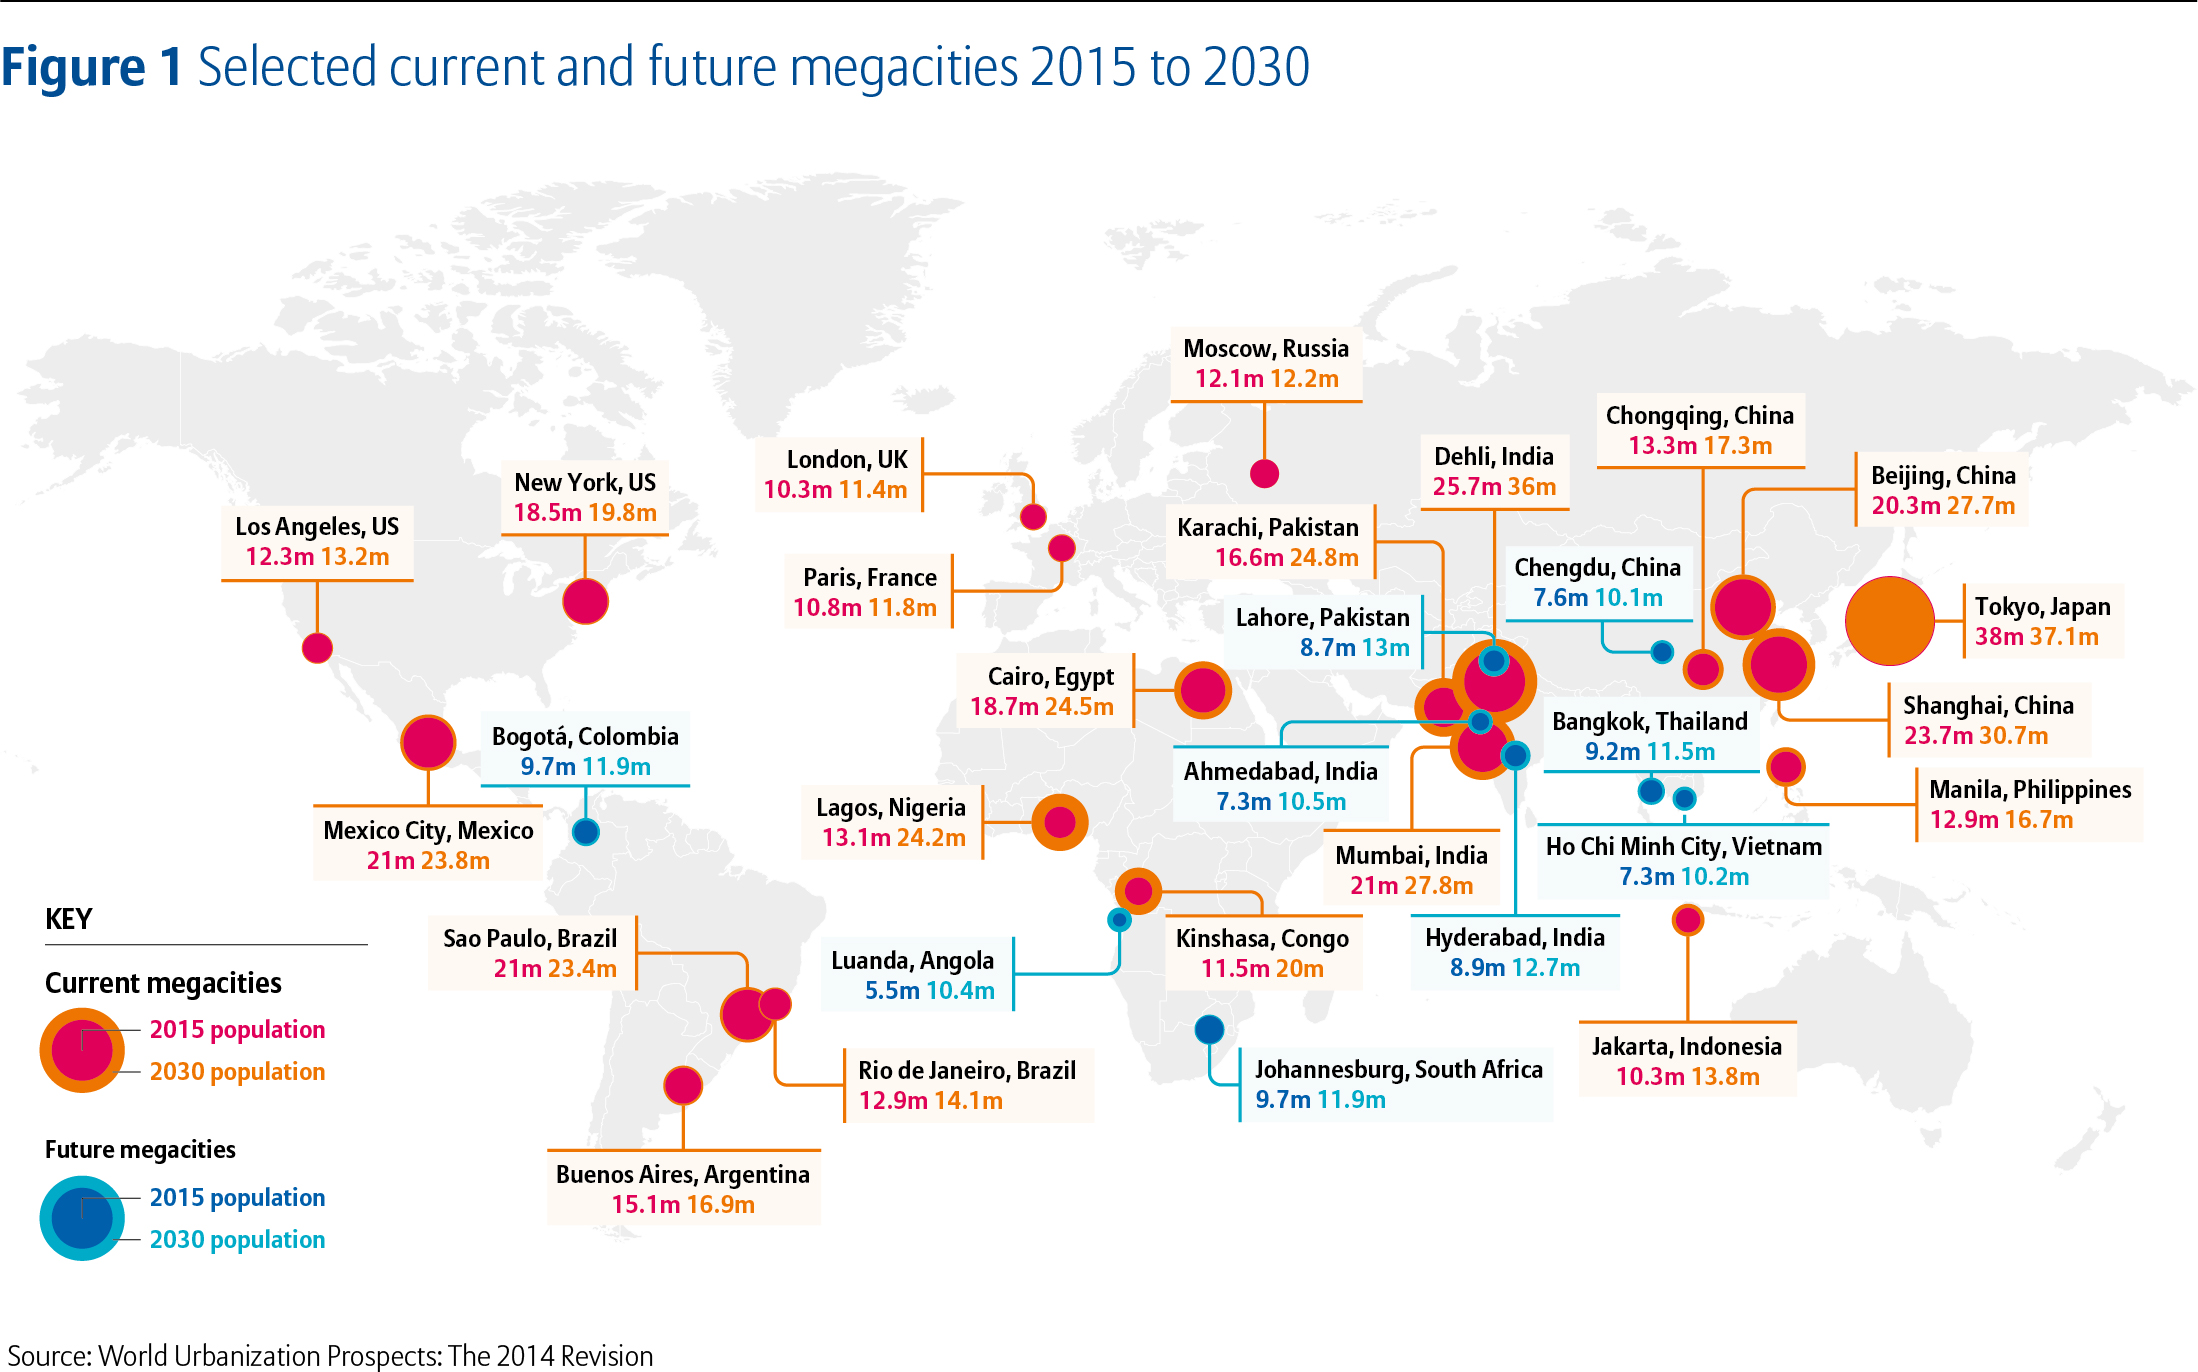 The megacity of the future is smart